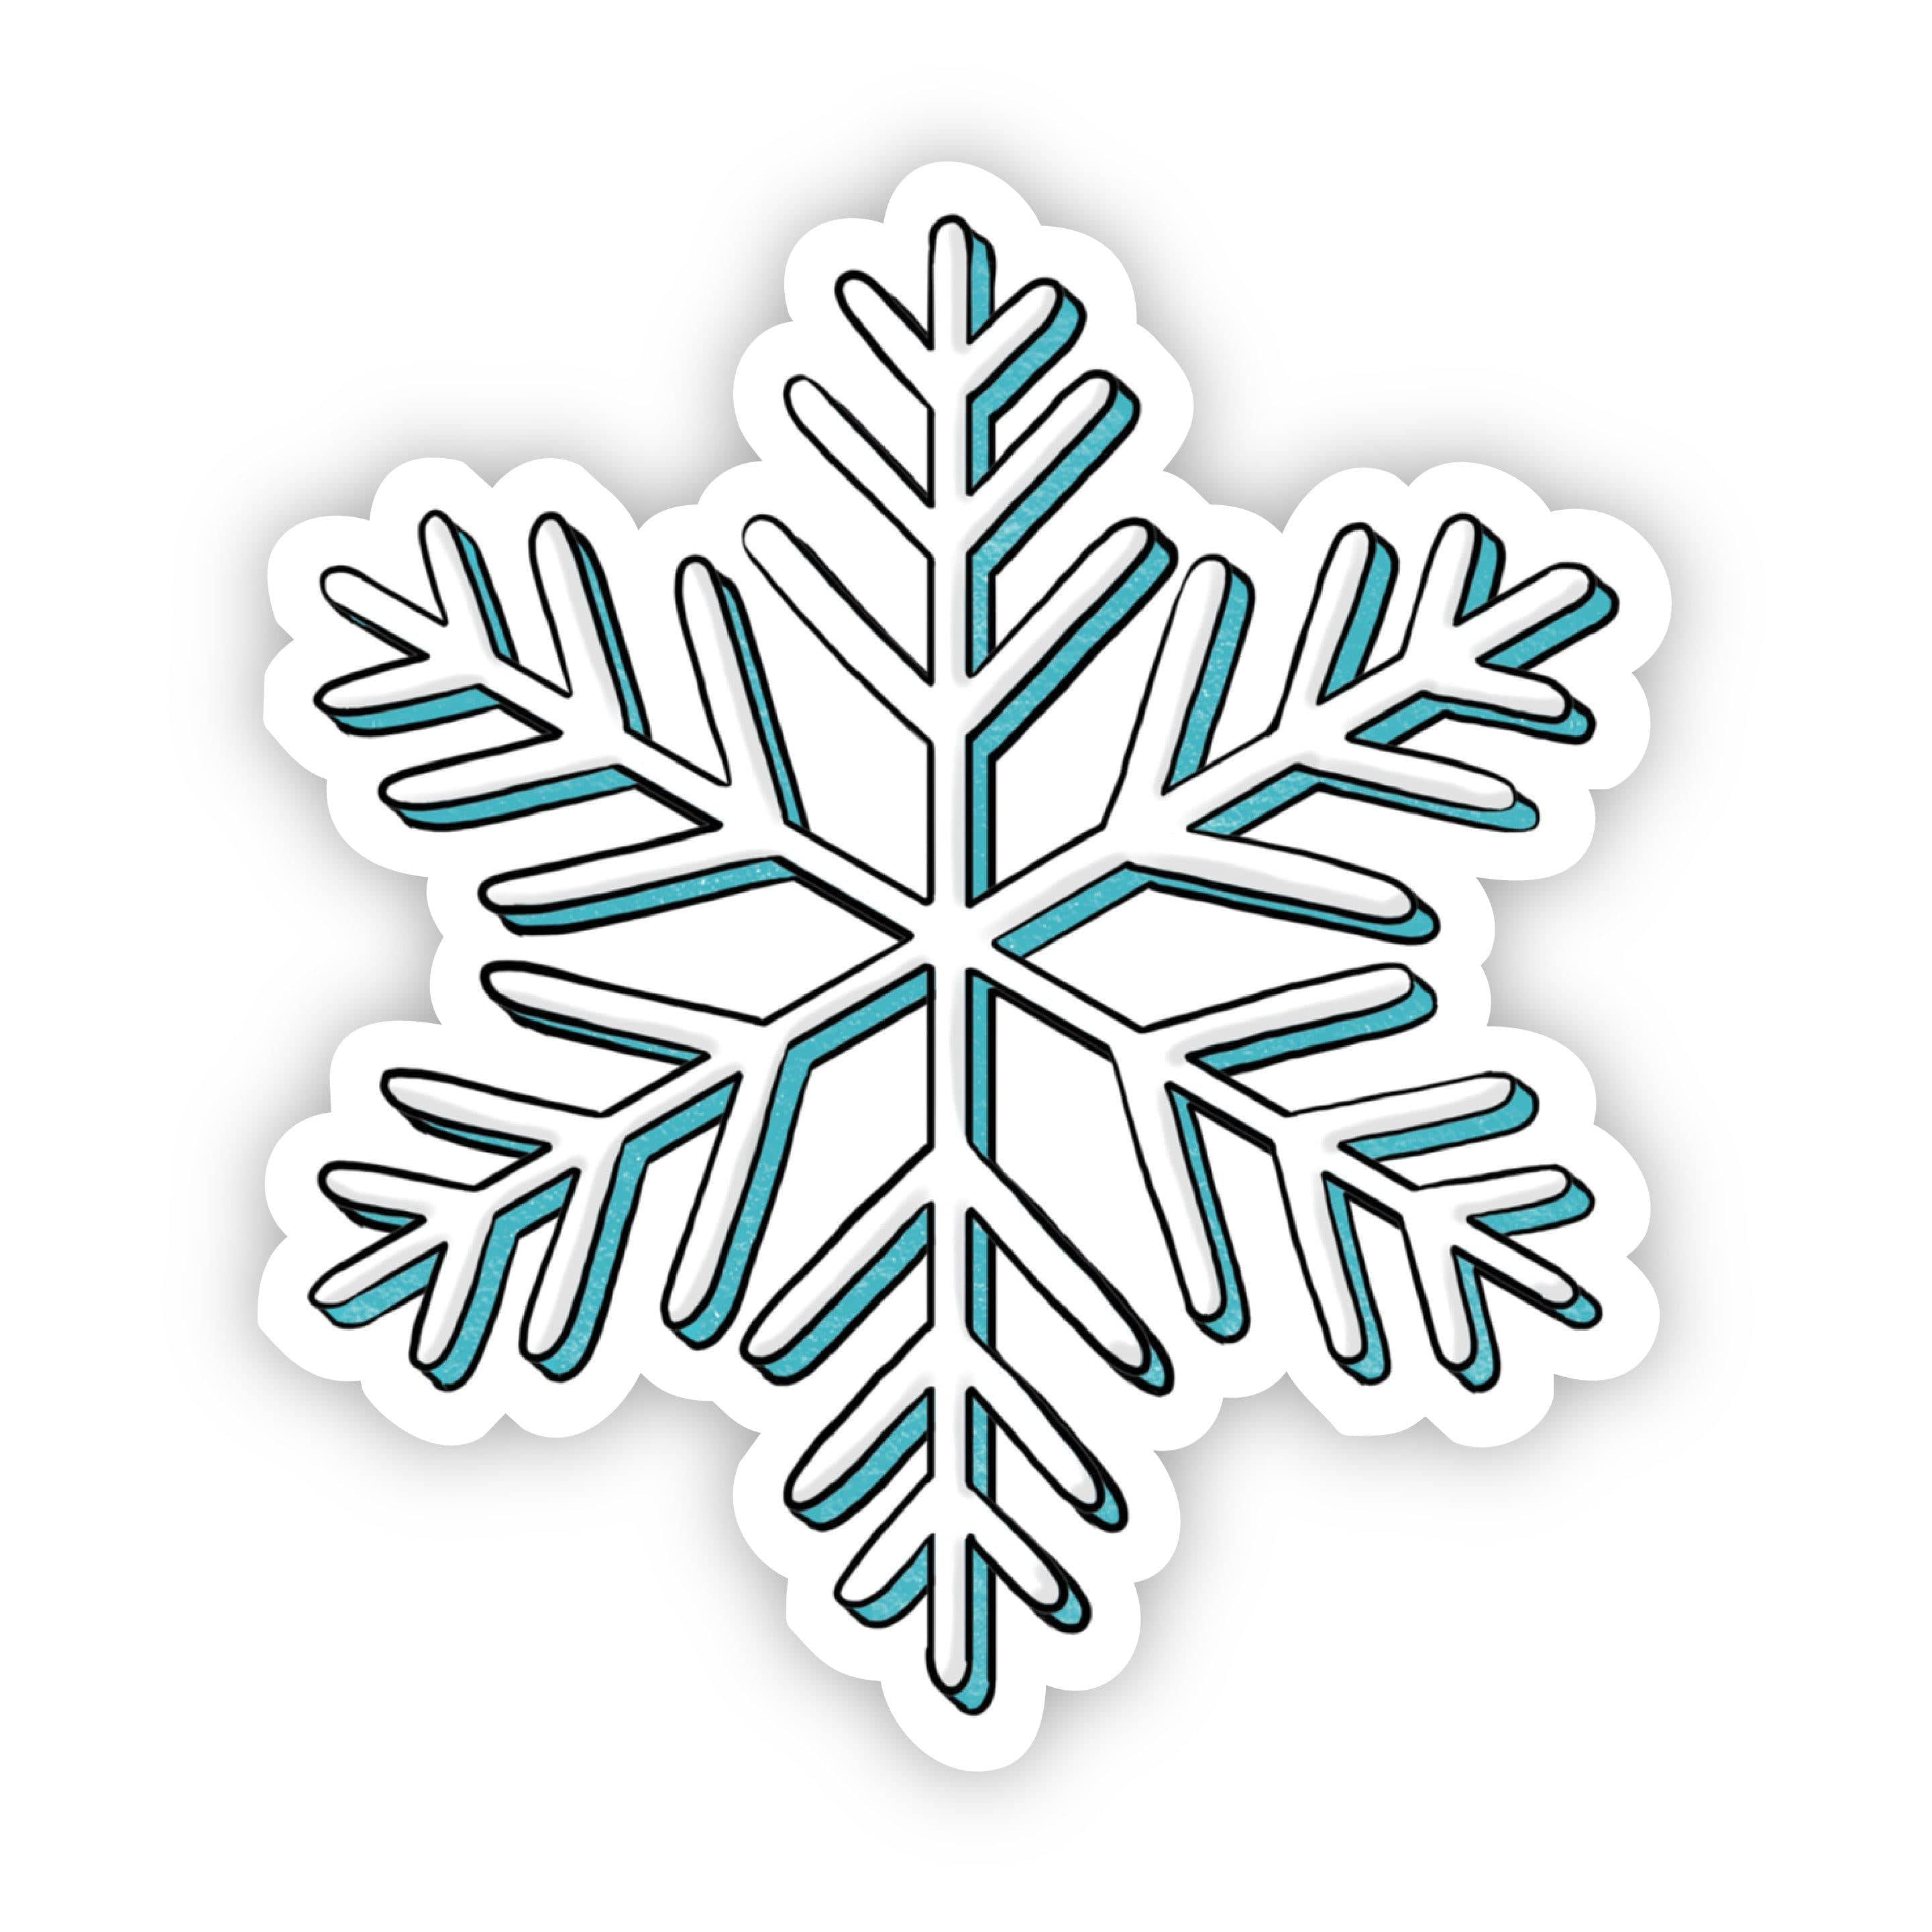 Snow Stickers for Sale  Snowflake sticker, Christmas stickers